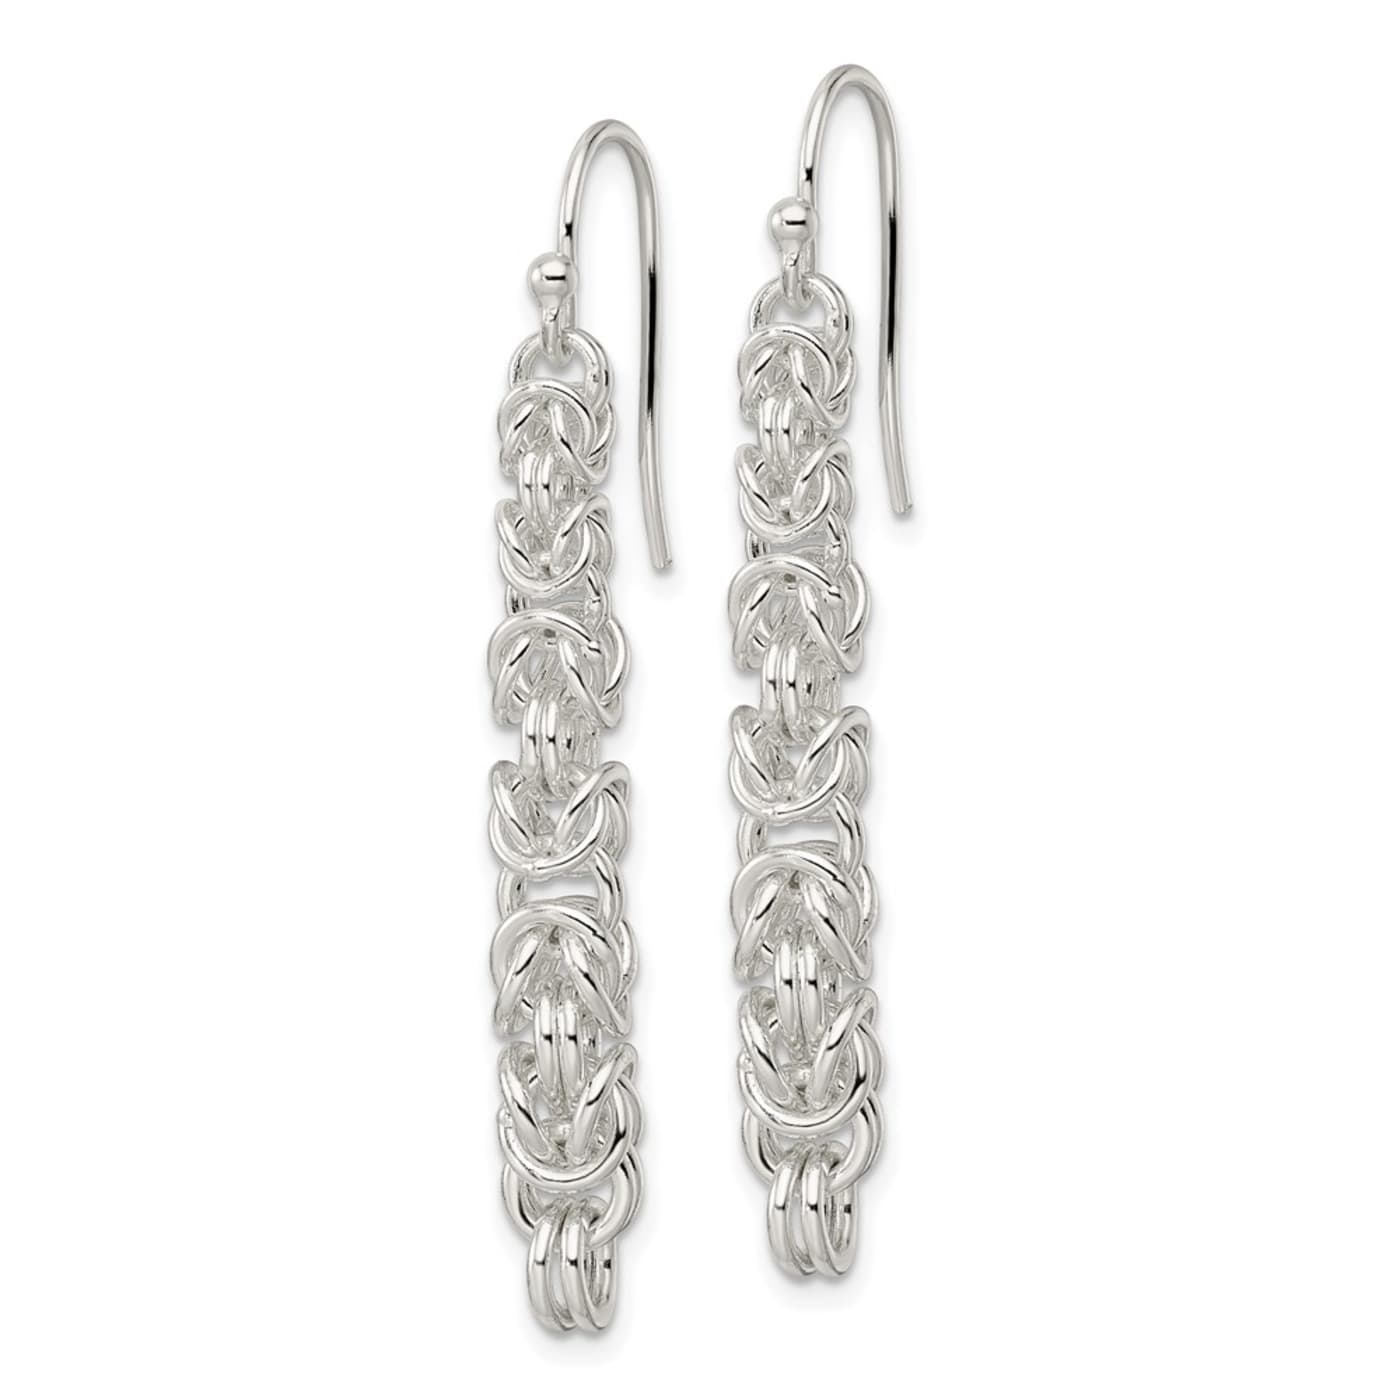 Dangling Chainmail Earrings, Solid Sterling Silver Chainmail